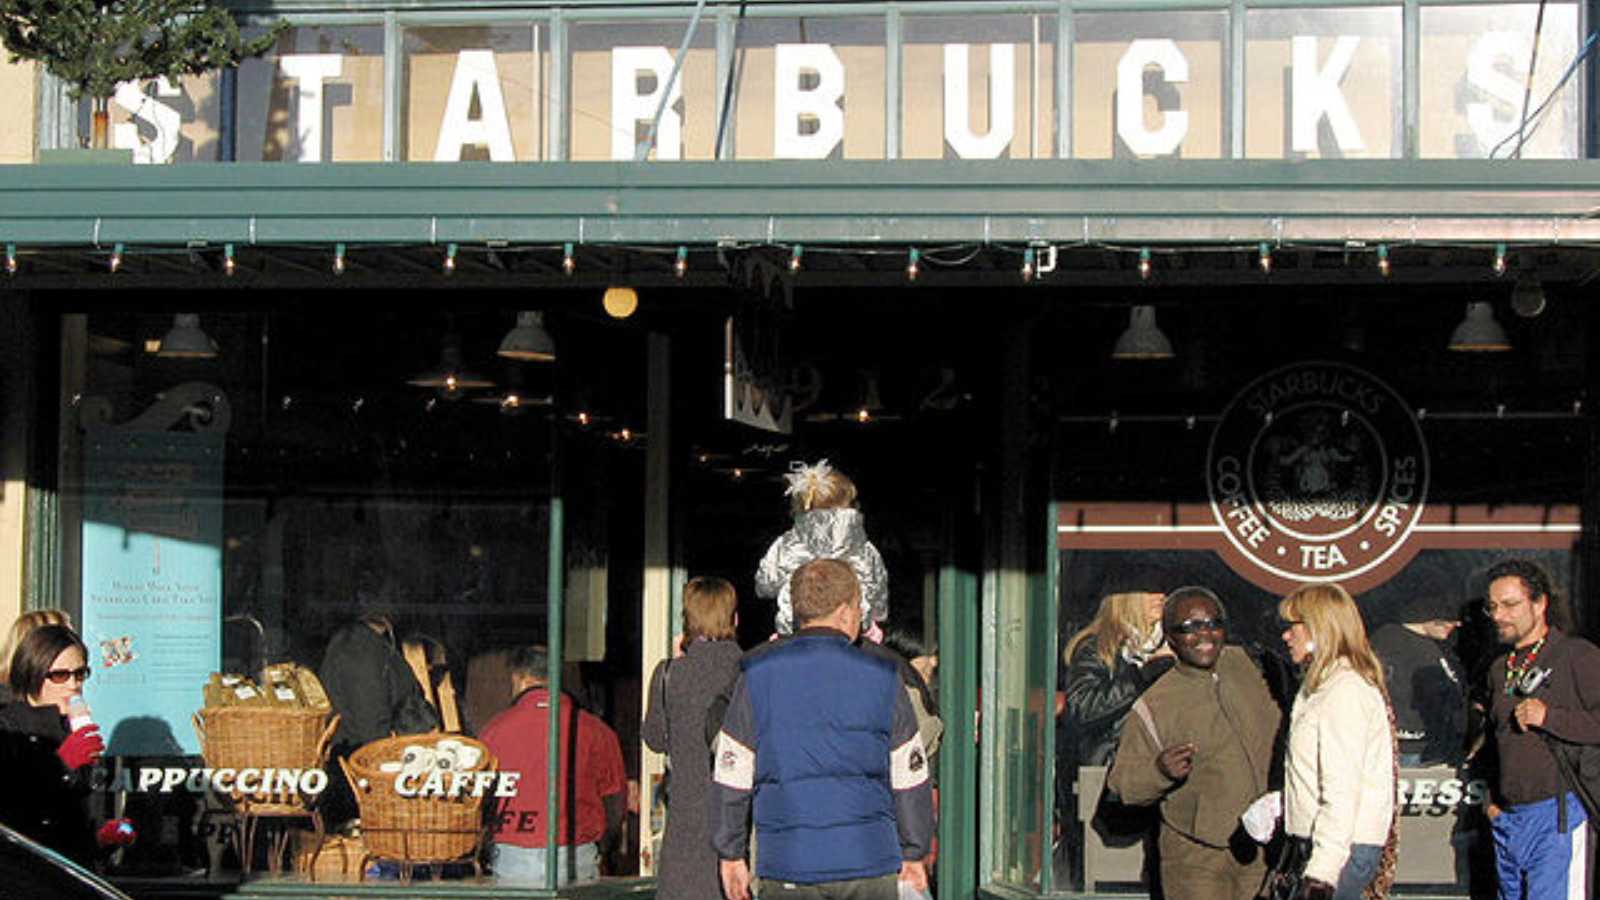 <p><span>Why wait hours for the same coffee you can get at any corner Starbucks? Answer this question, and you'll understand why the Original Starbucks lands on our list.</span></p>